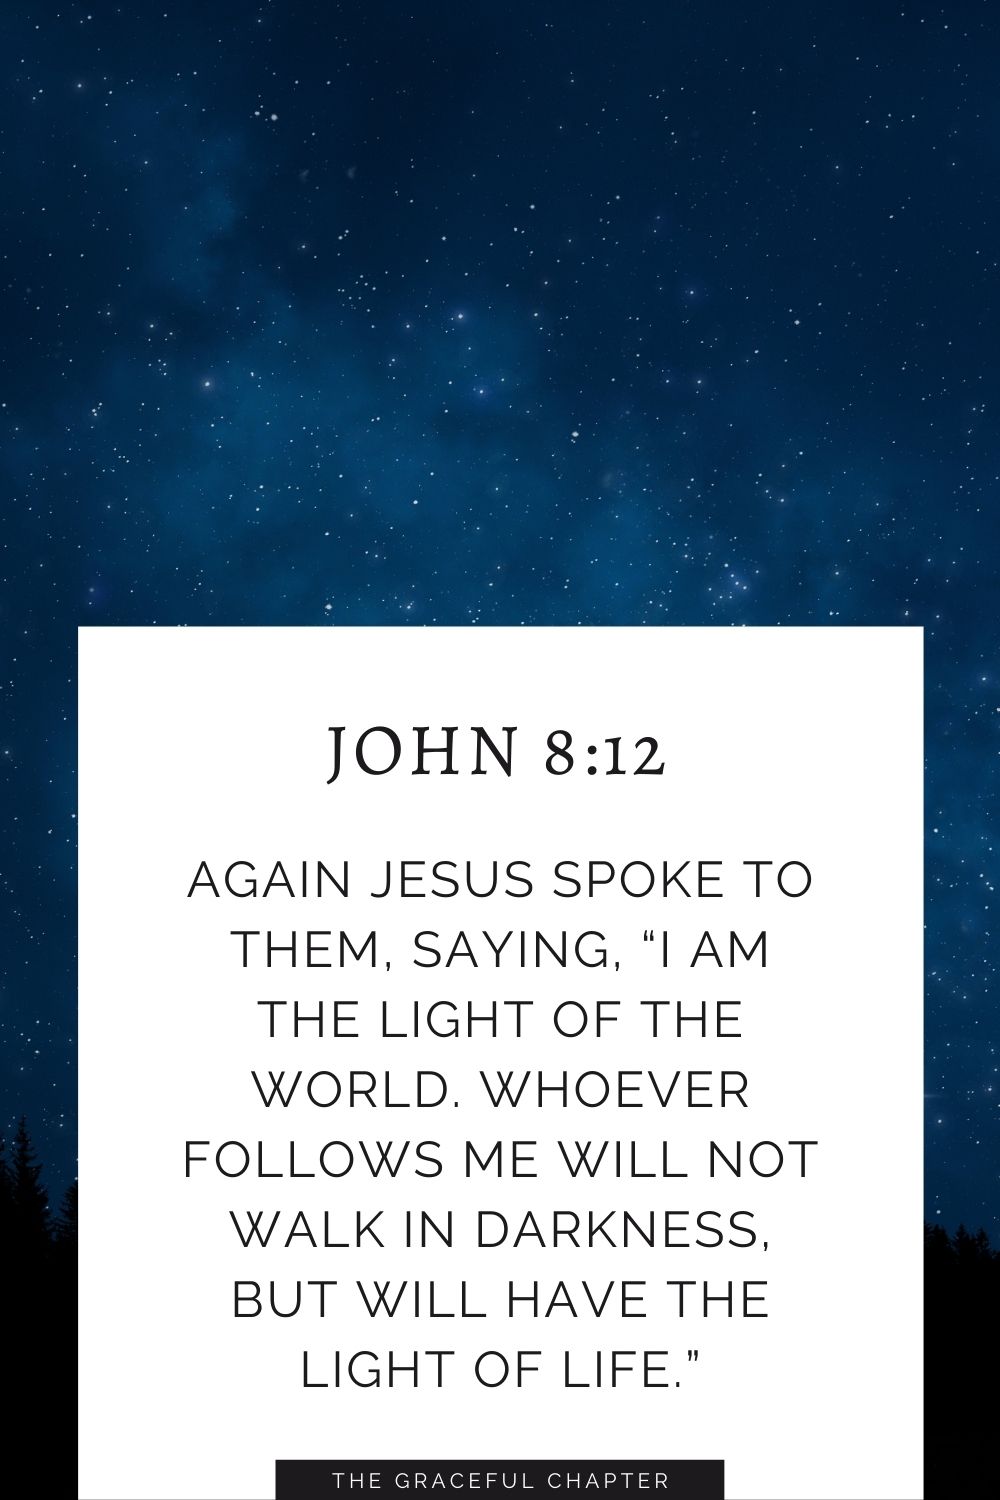 Again Jesus spoke to them, saying, “I am the light of the world. Whoever follows me will not walk in darkness, but will have the light of life.” John 8:12